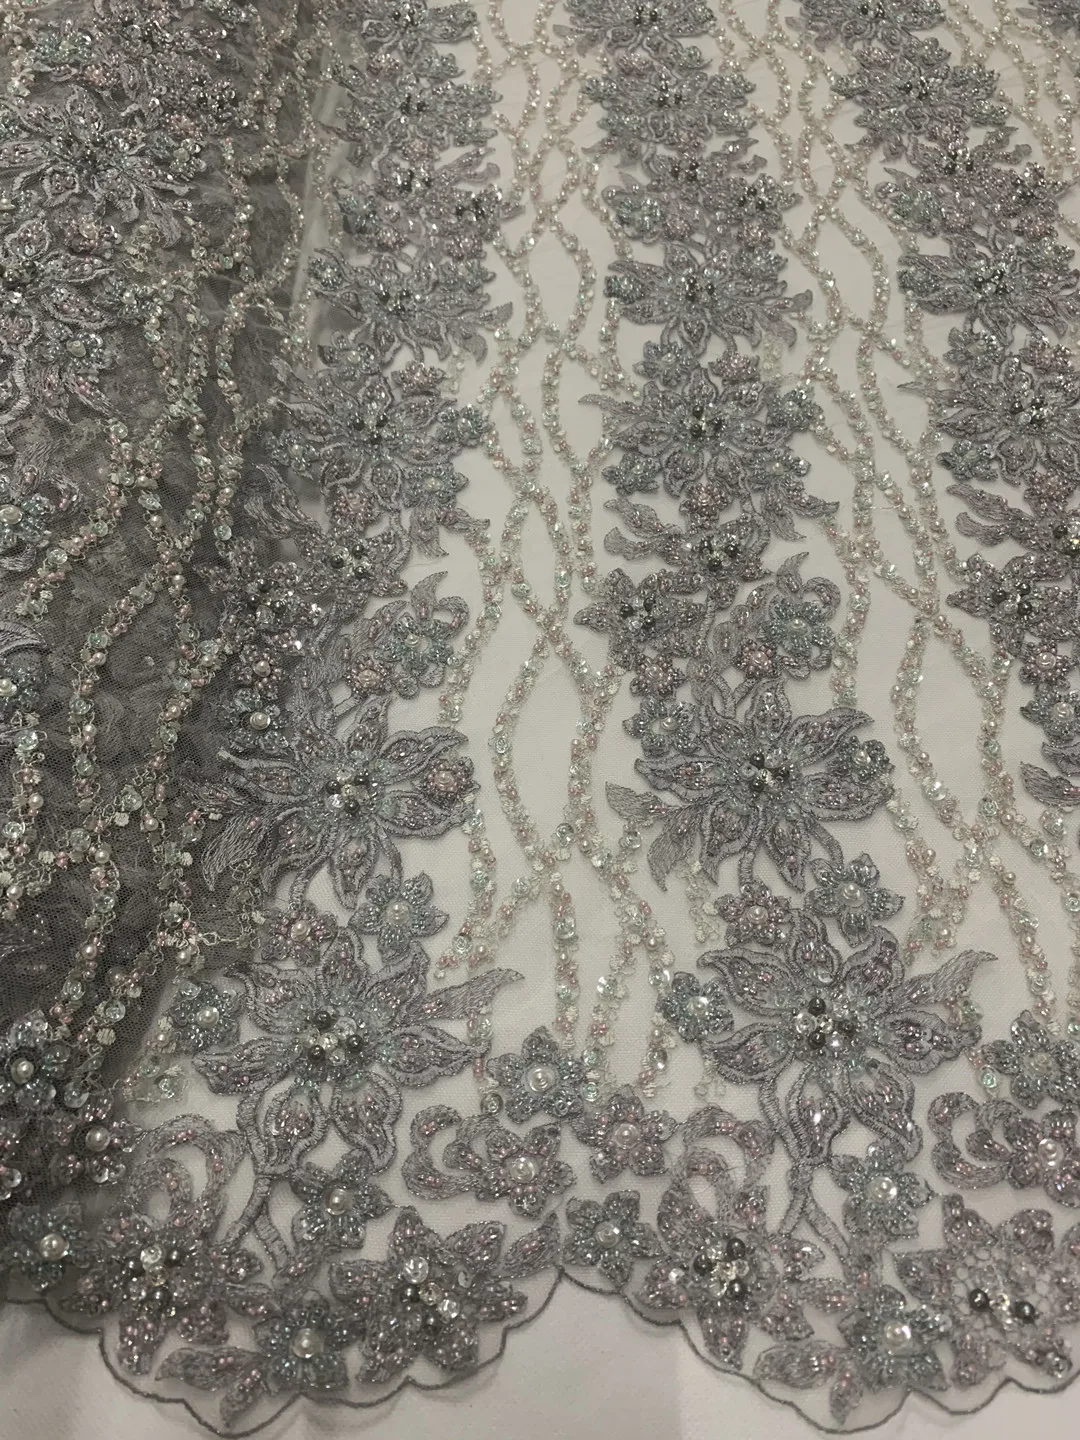 Luxurious  hand-embroidery fabric Handmade stones embroidery French mesh gauze lace fabric for wedding dress evening dress